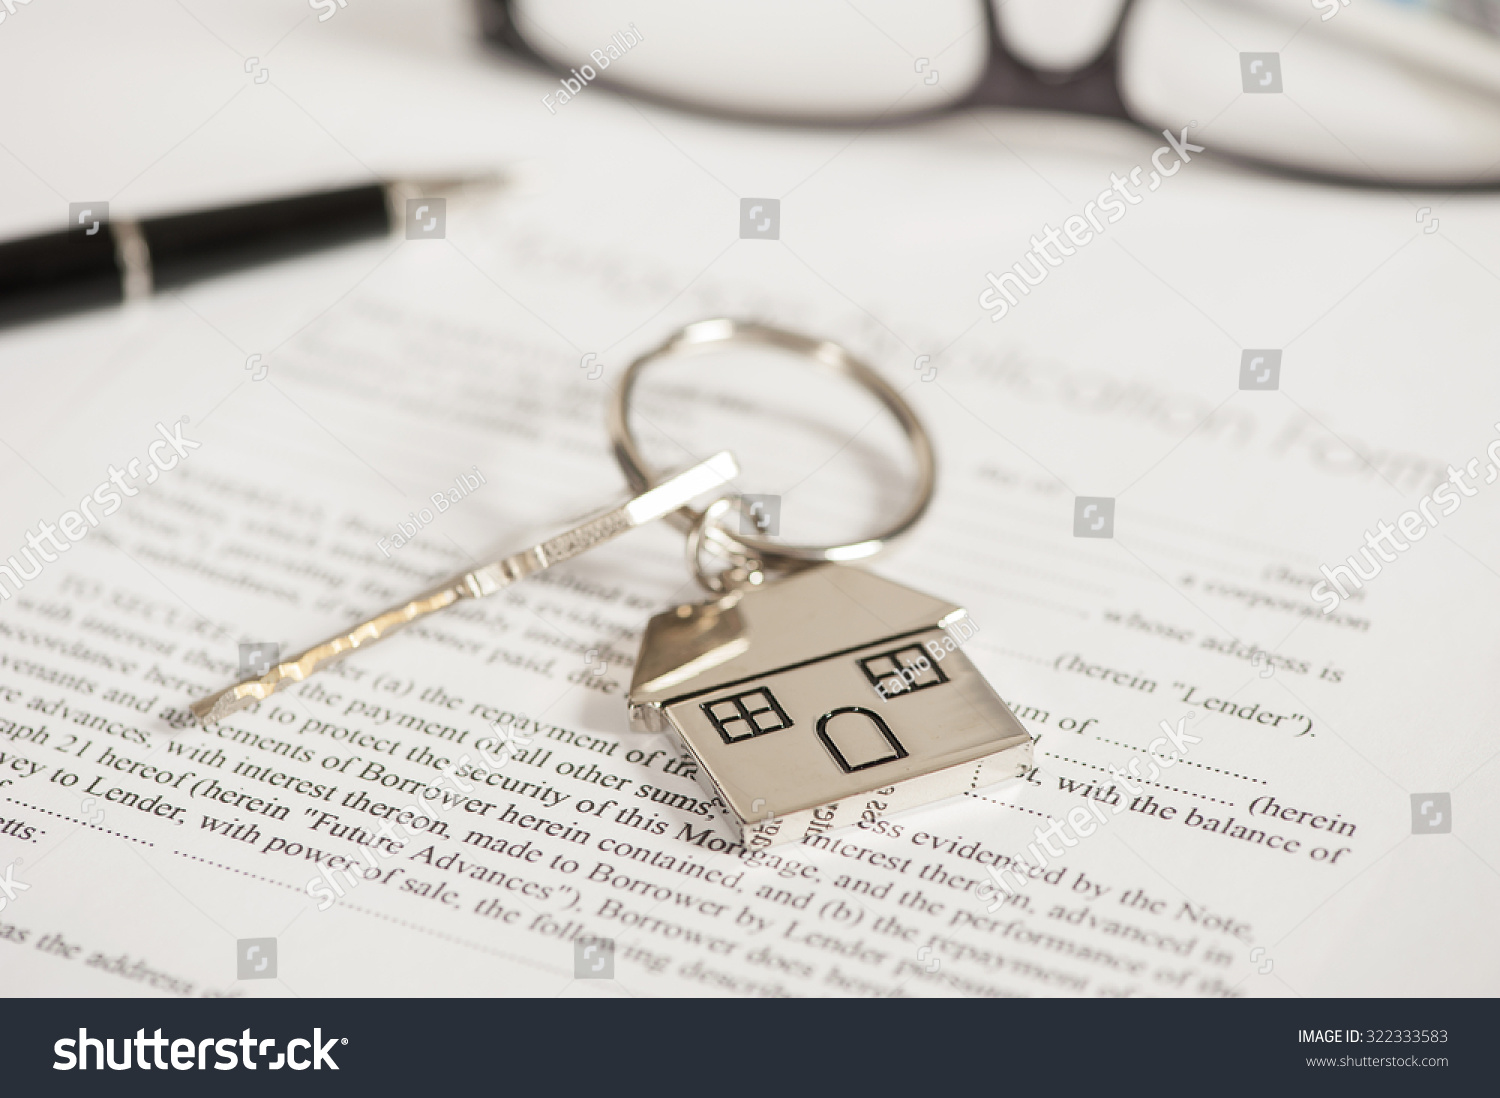 Mortgage loan agreement application with house shaped keyring #322333583